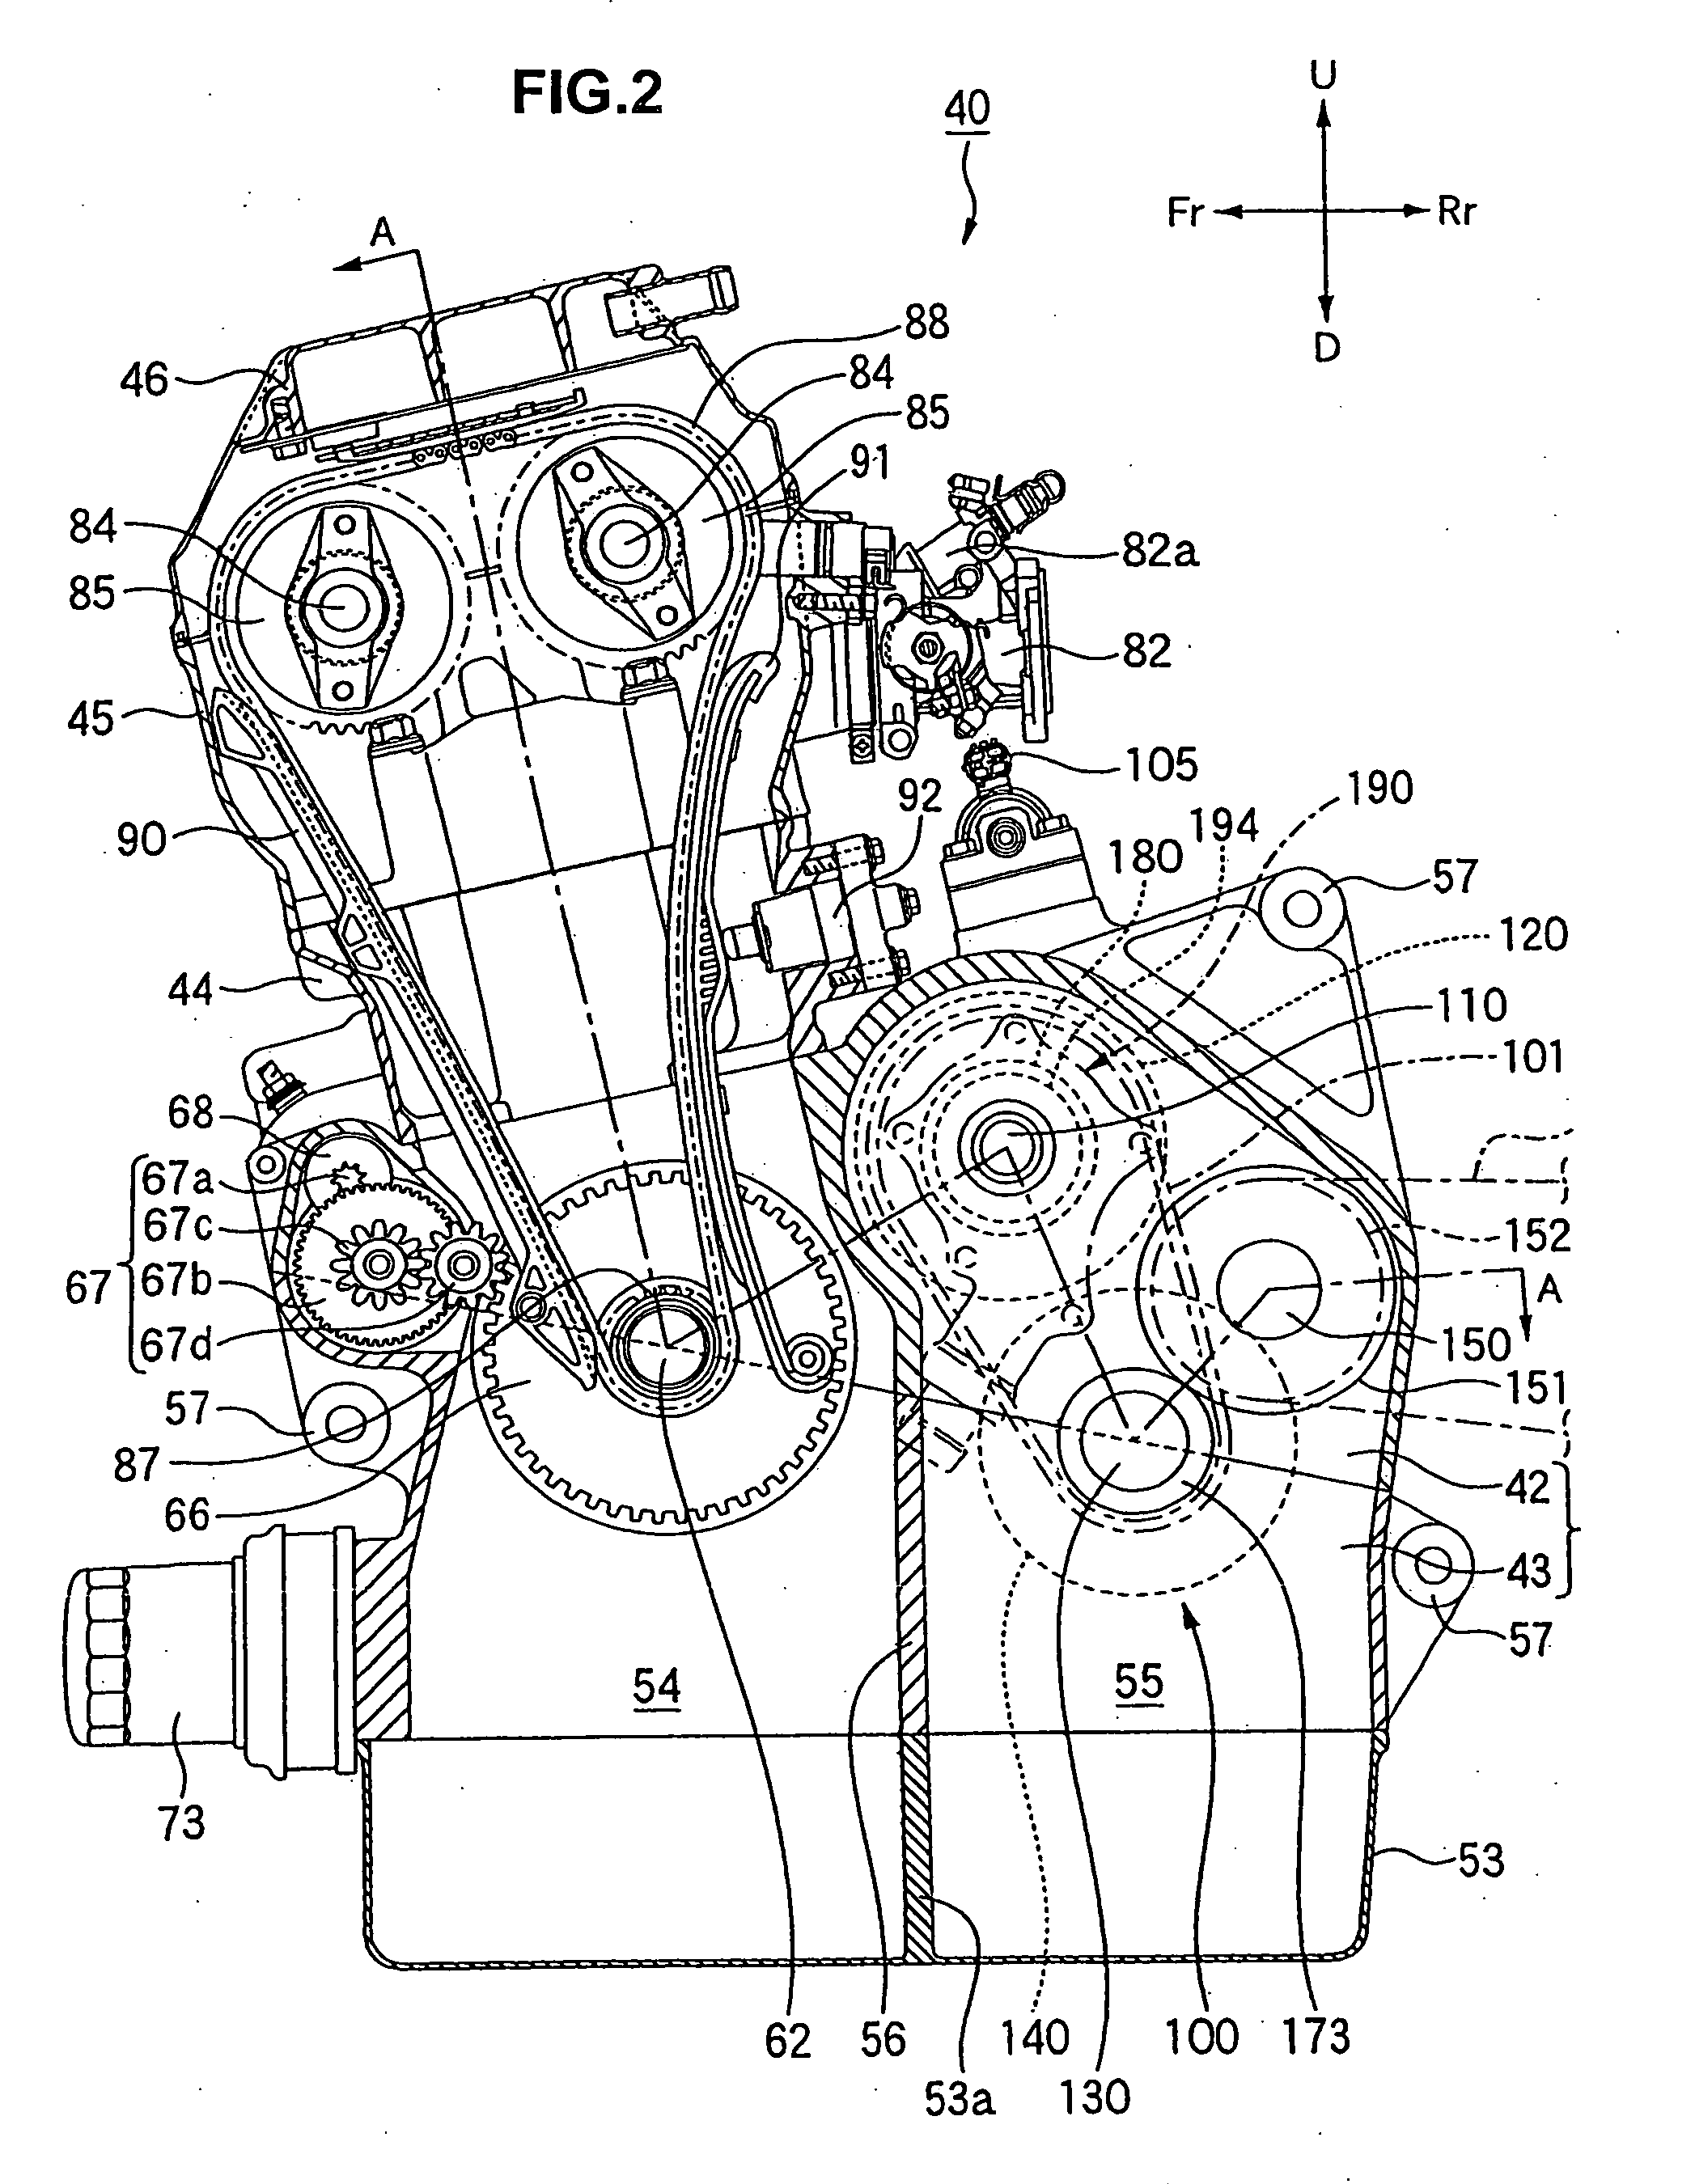 Power unit having engine and continuously variable transmission, configuration thereof, and vehicle incorporating same